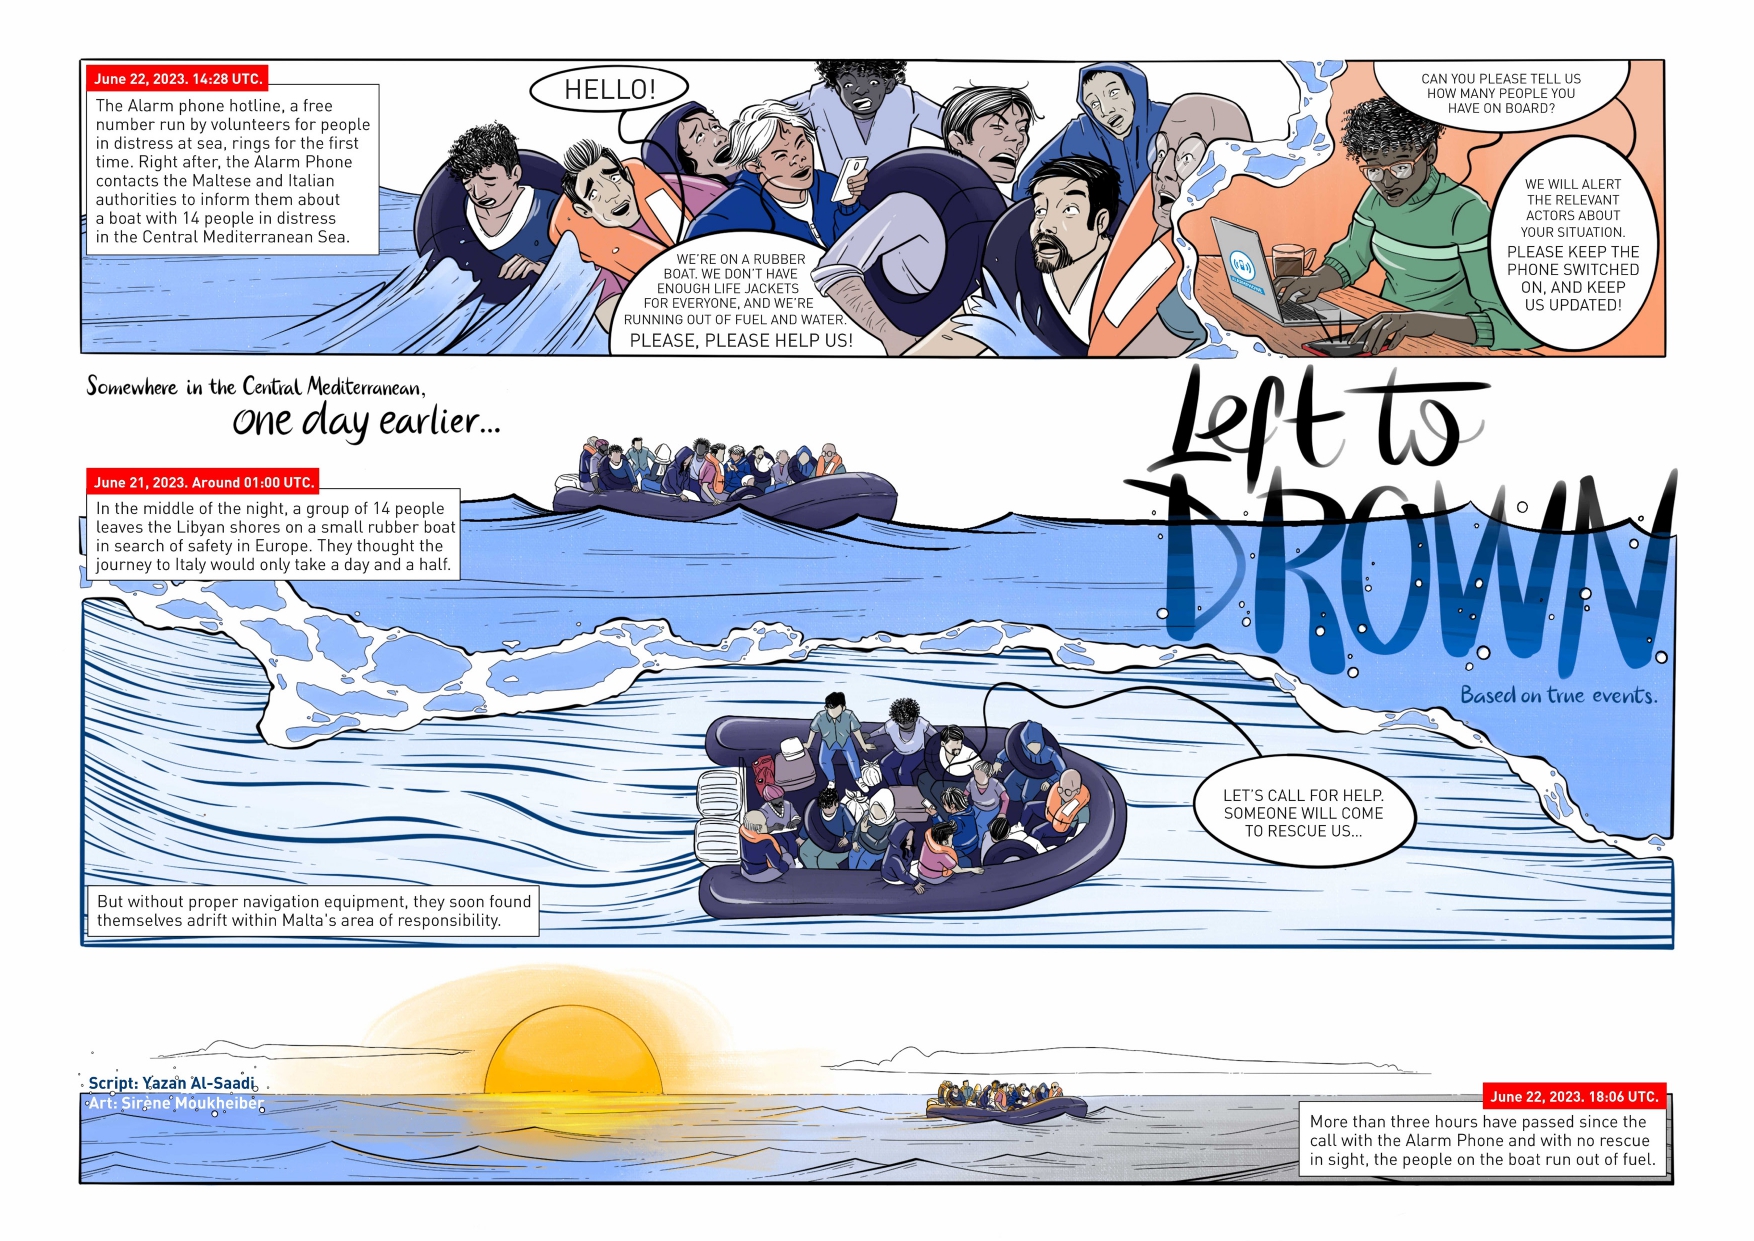 left-to-drown_comics_msf-1_page-0001-4054060